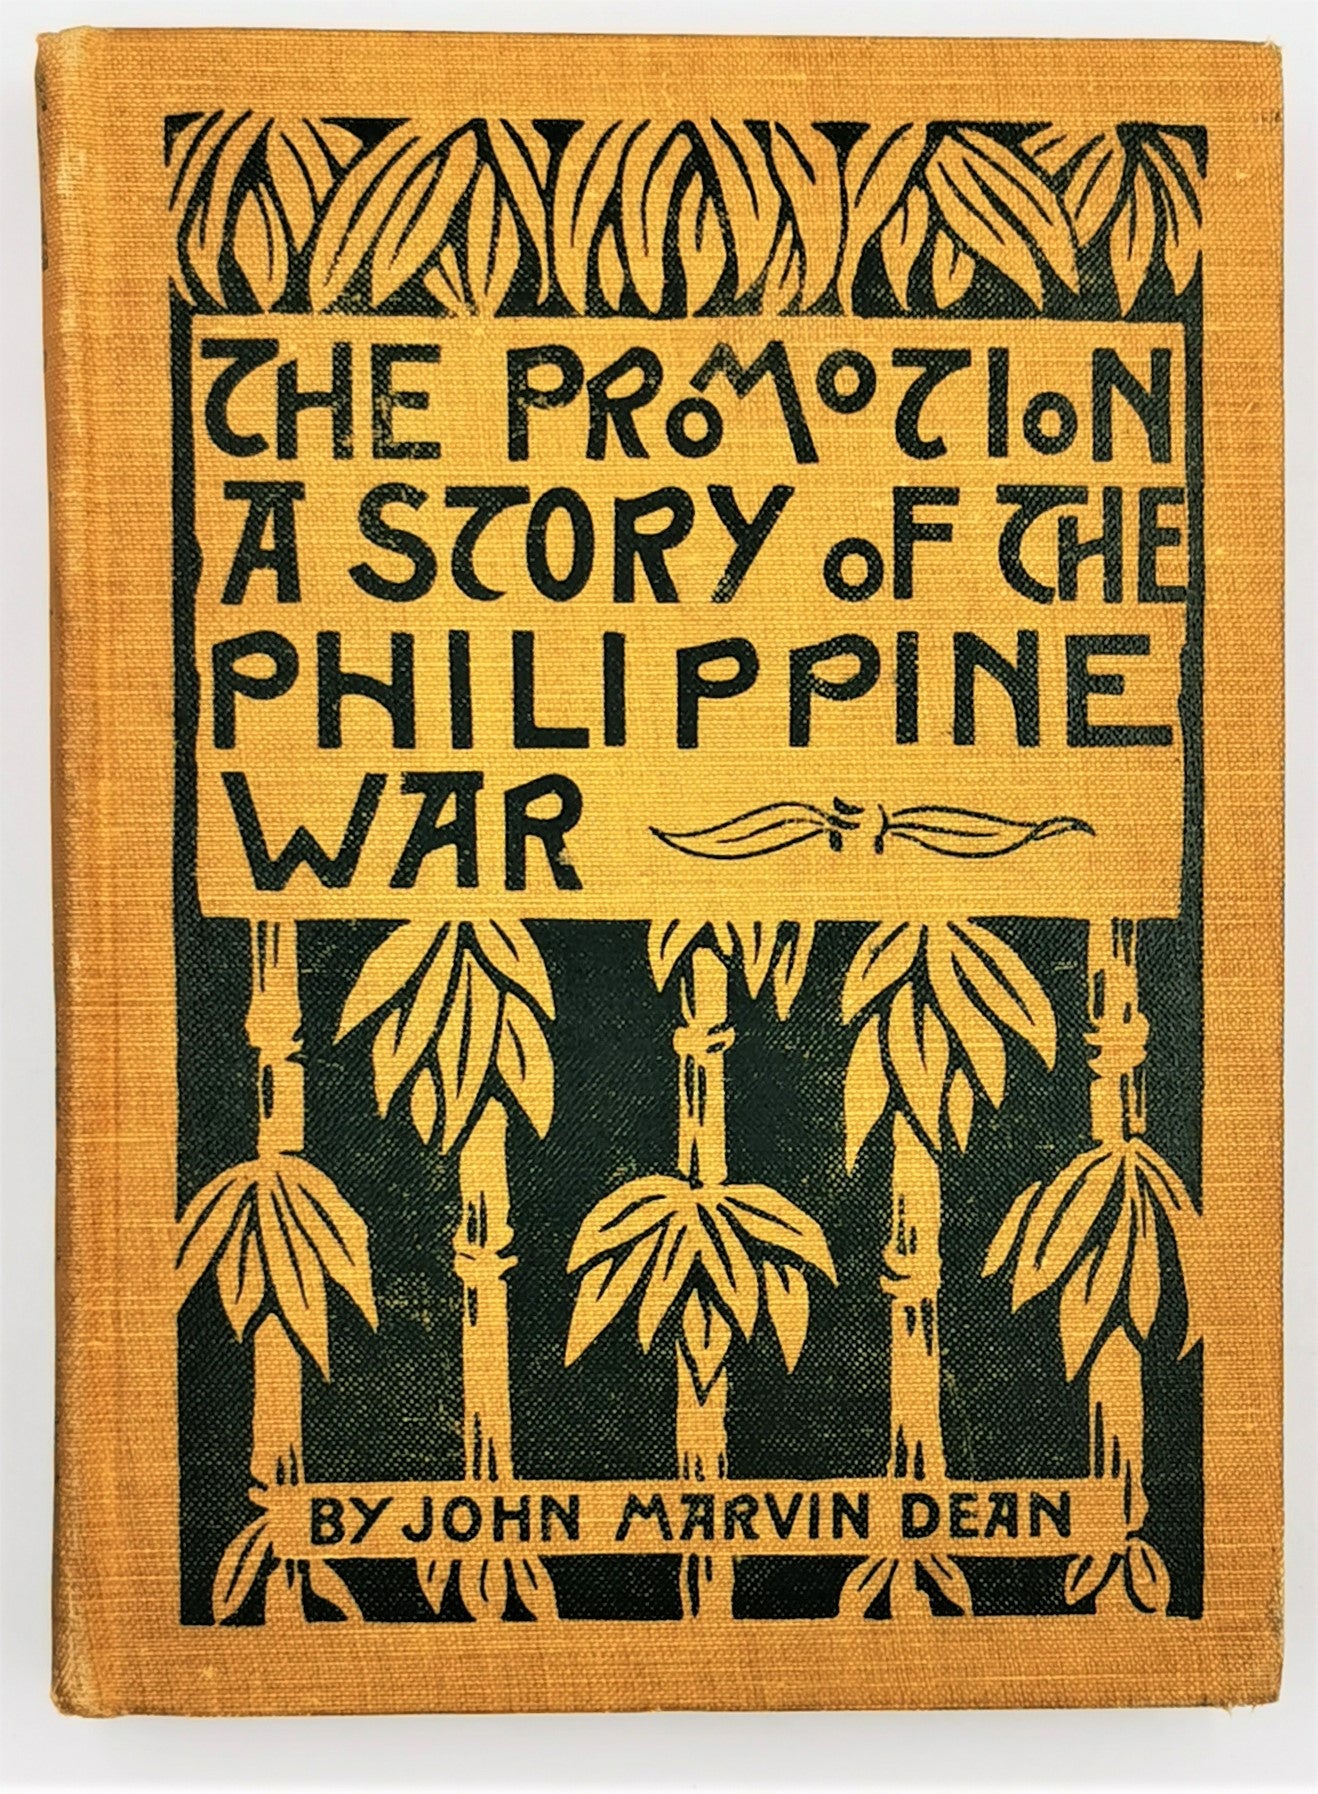 The promotion a story of the Philippine War by John Marvin Dean